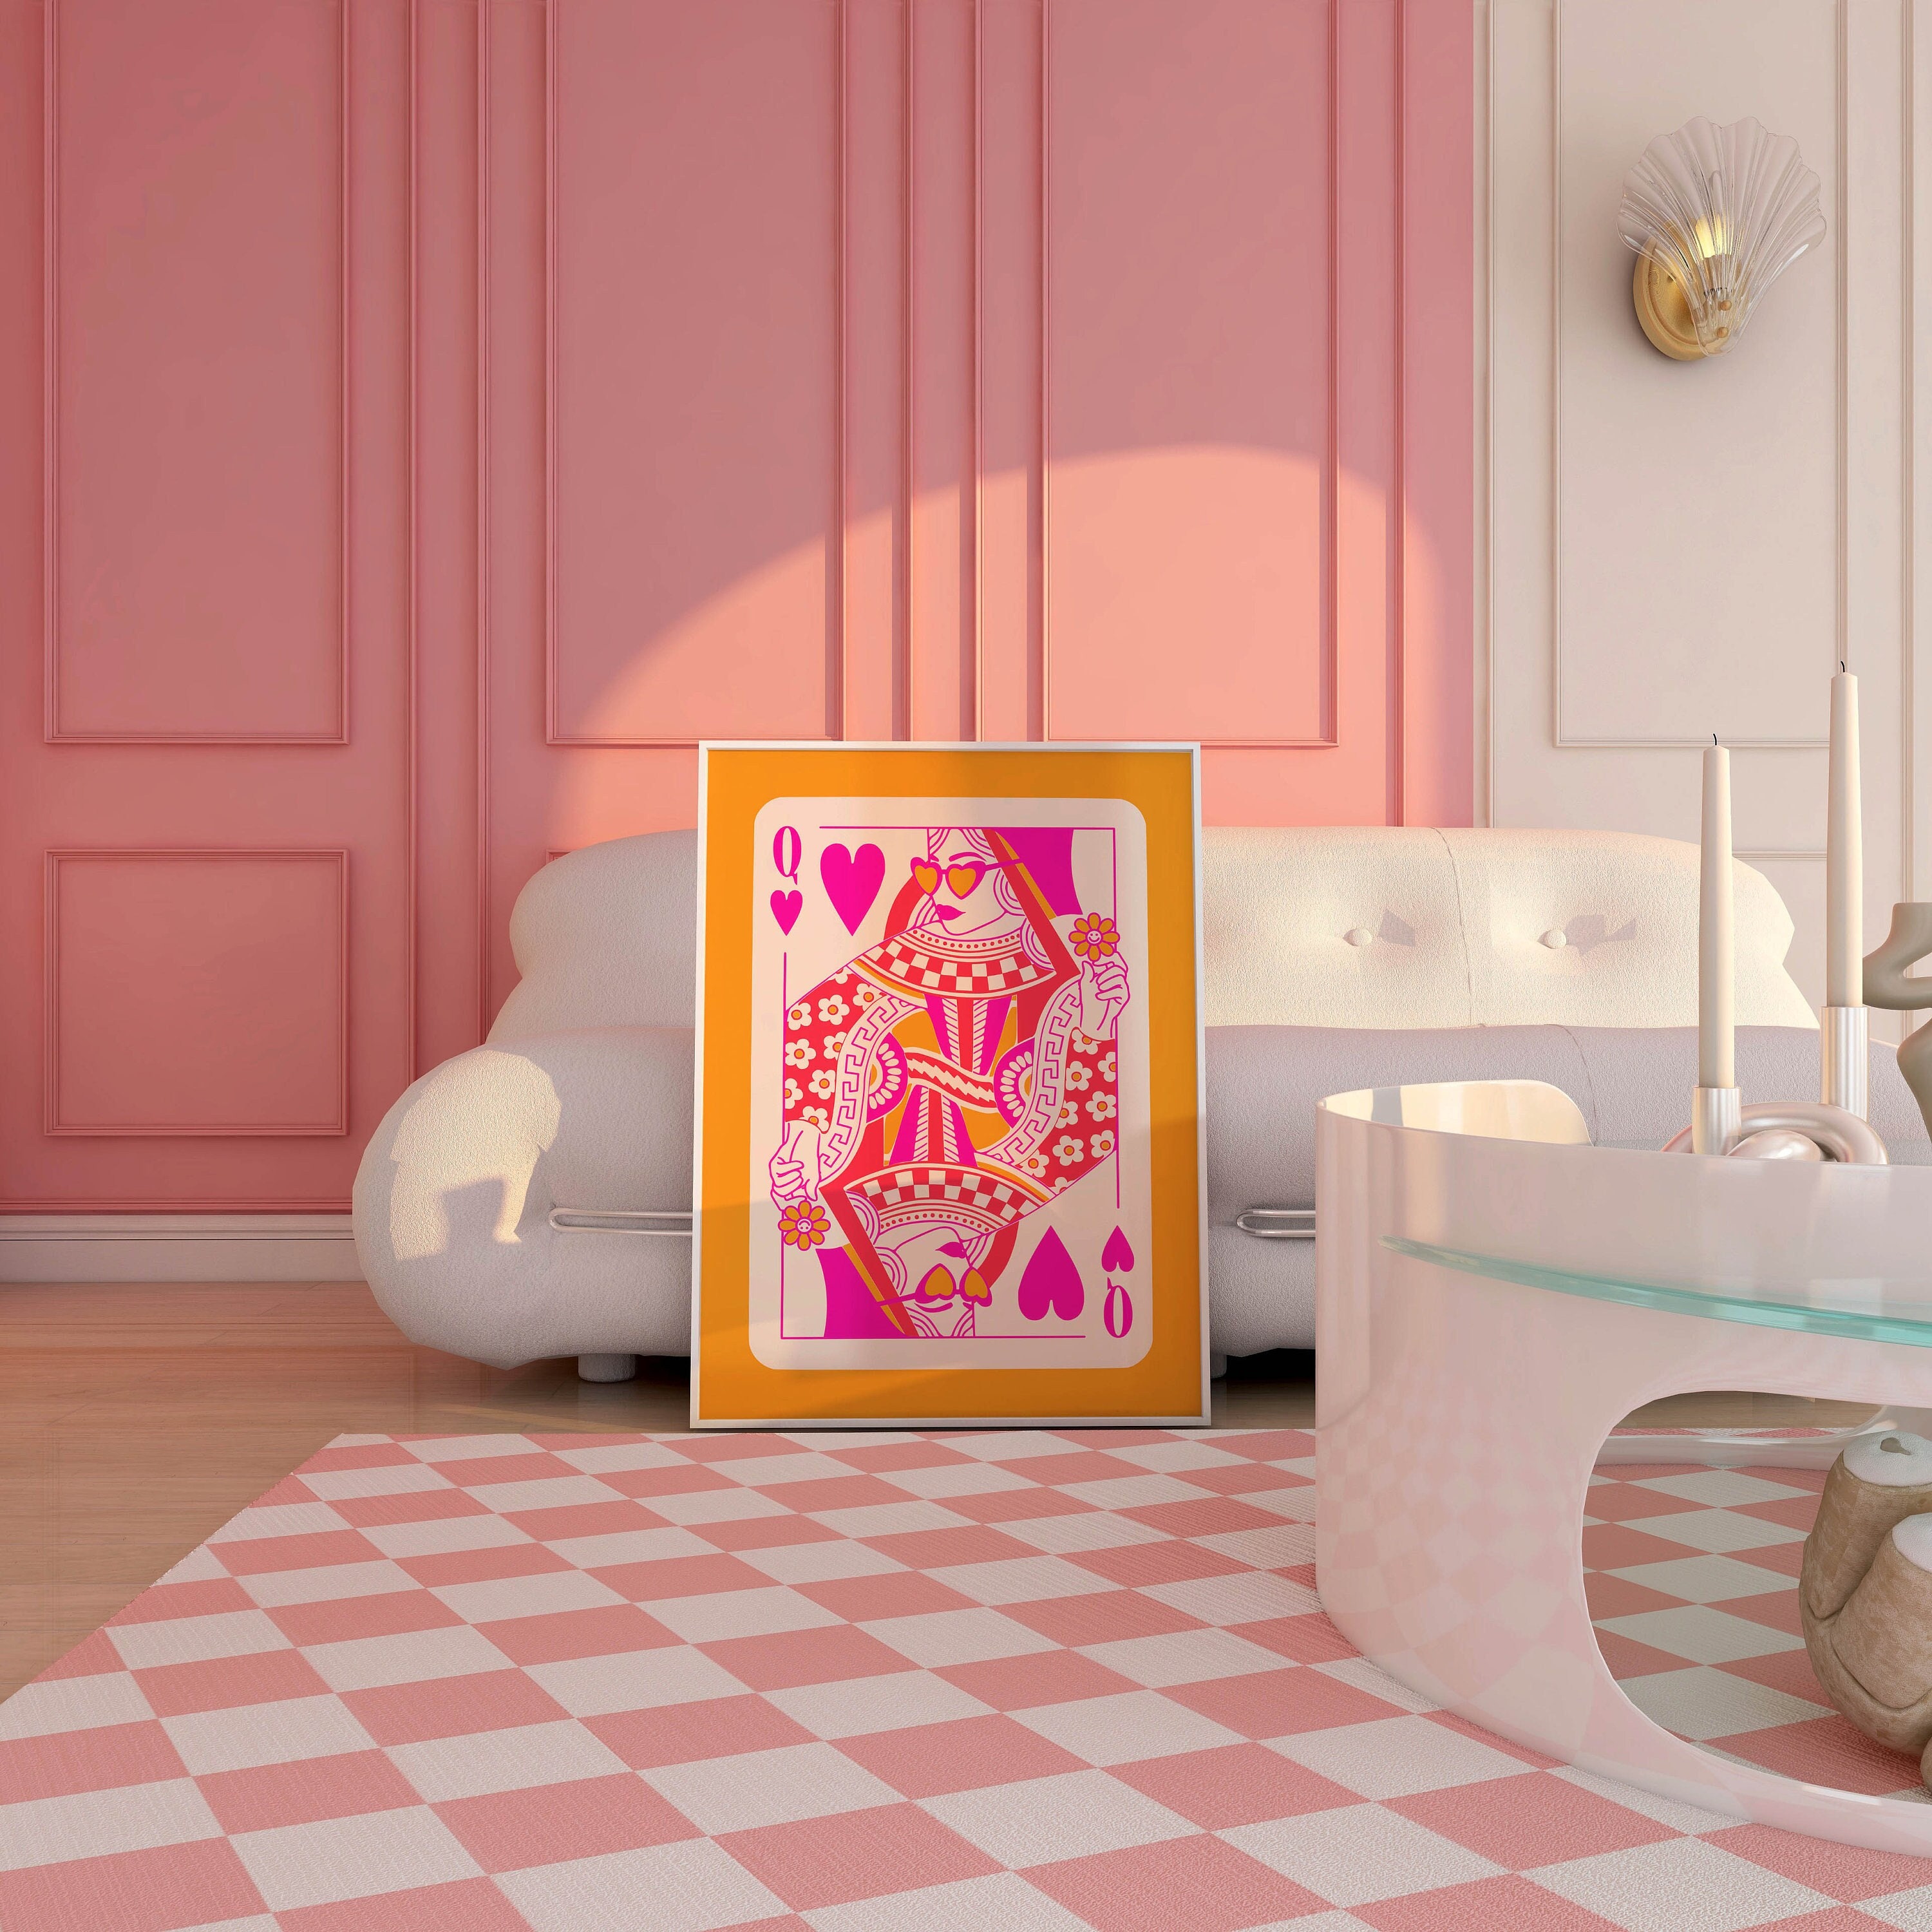 Discover queen of hearts retro wall art pink poster print preppy room decor